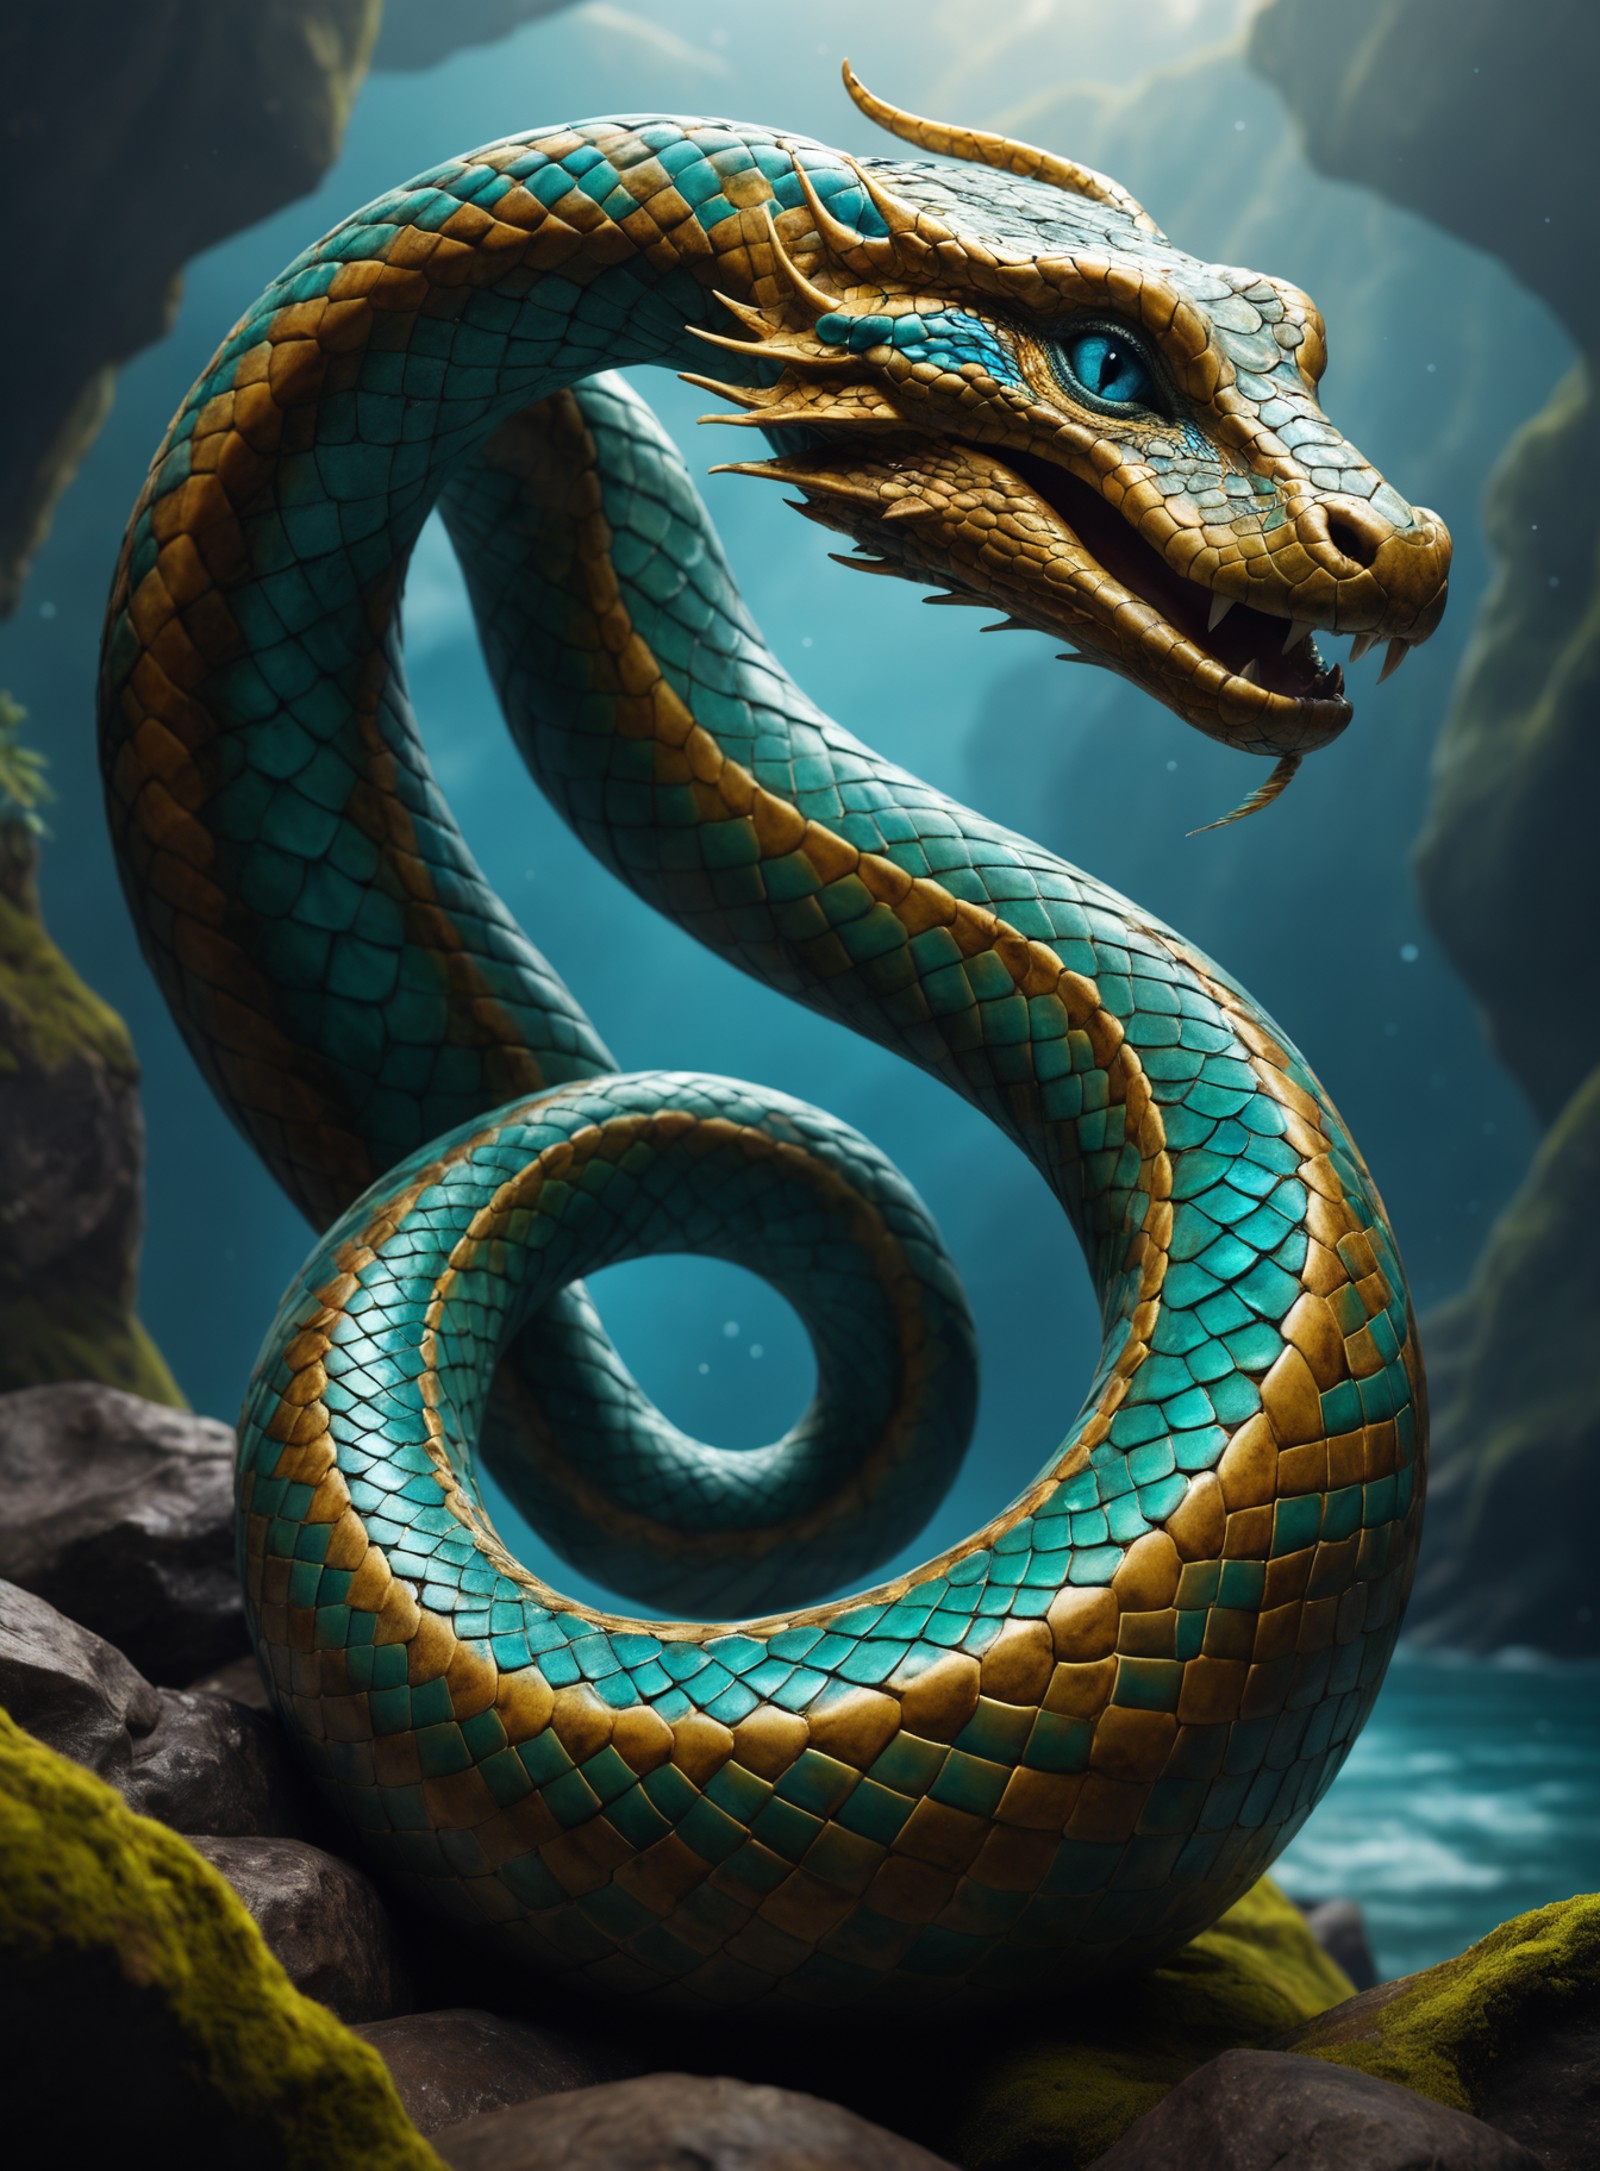 a colossal serpent, coiled around the entire Midgard, the earth. The scales covering its body come in a variety of vibrant...